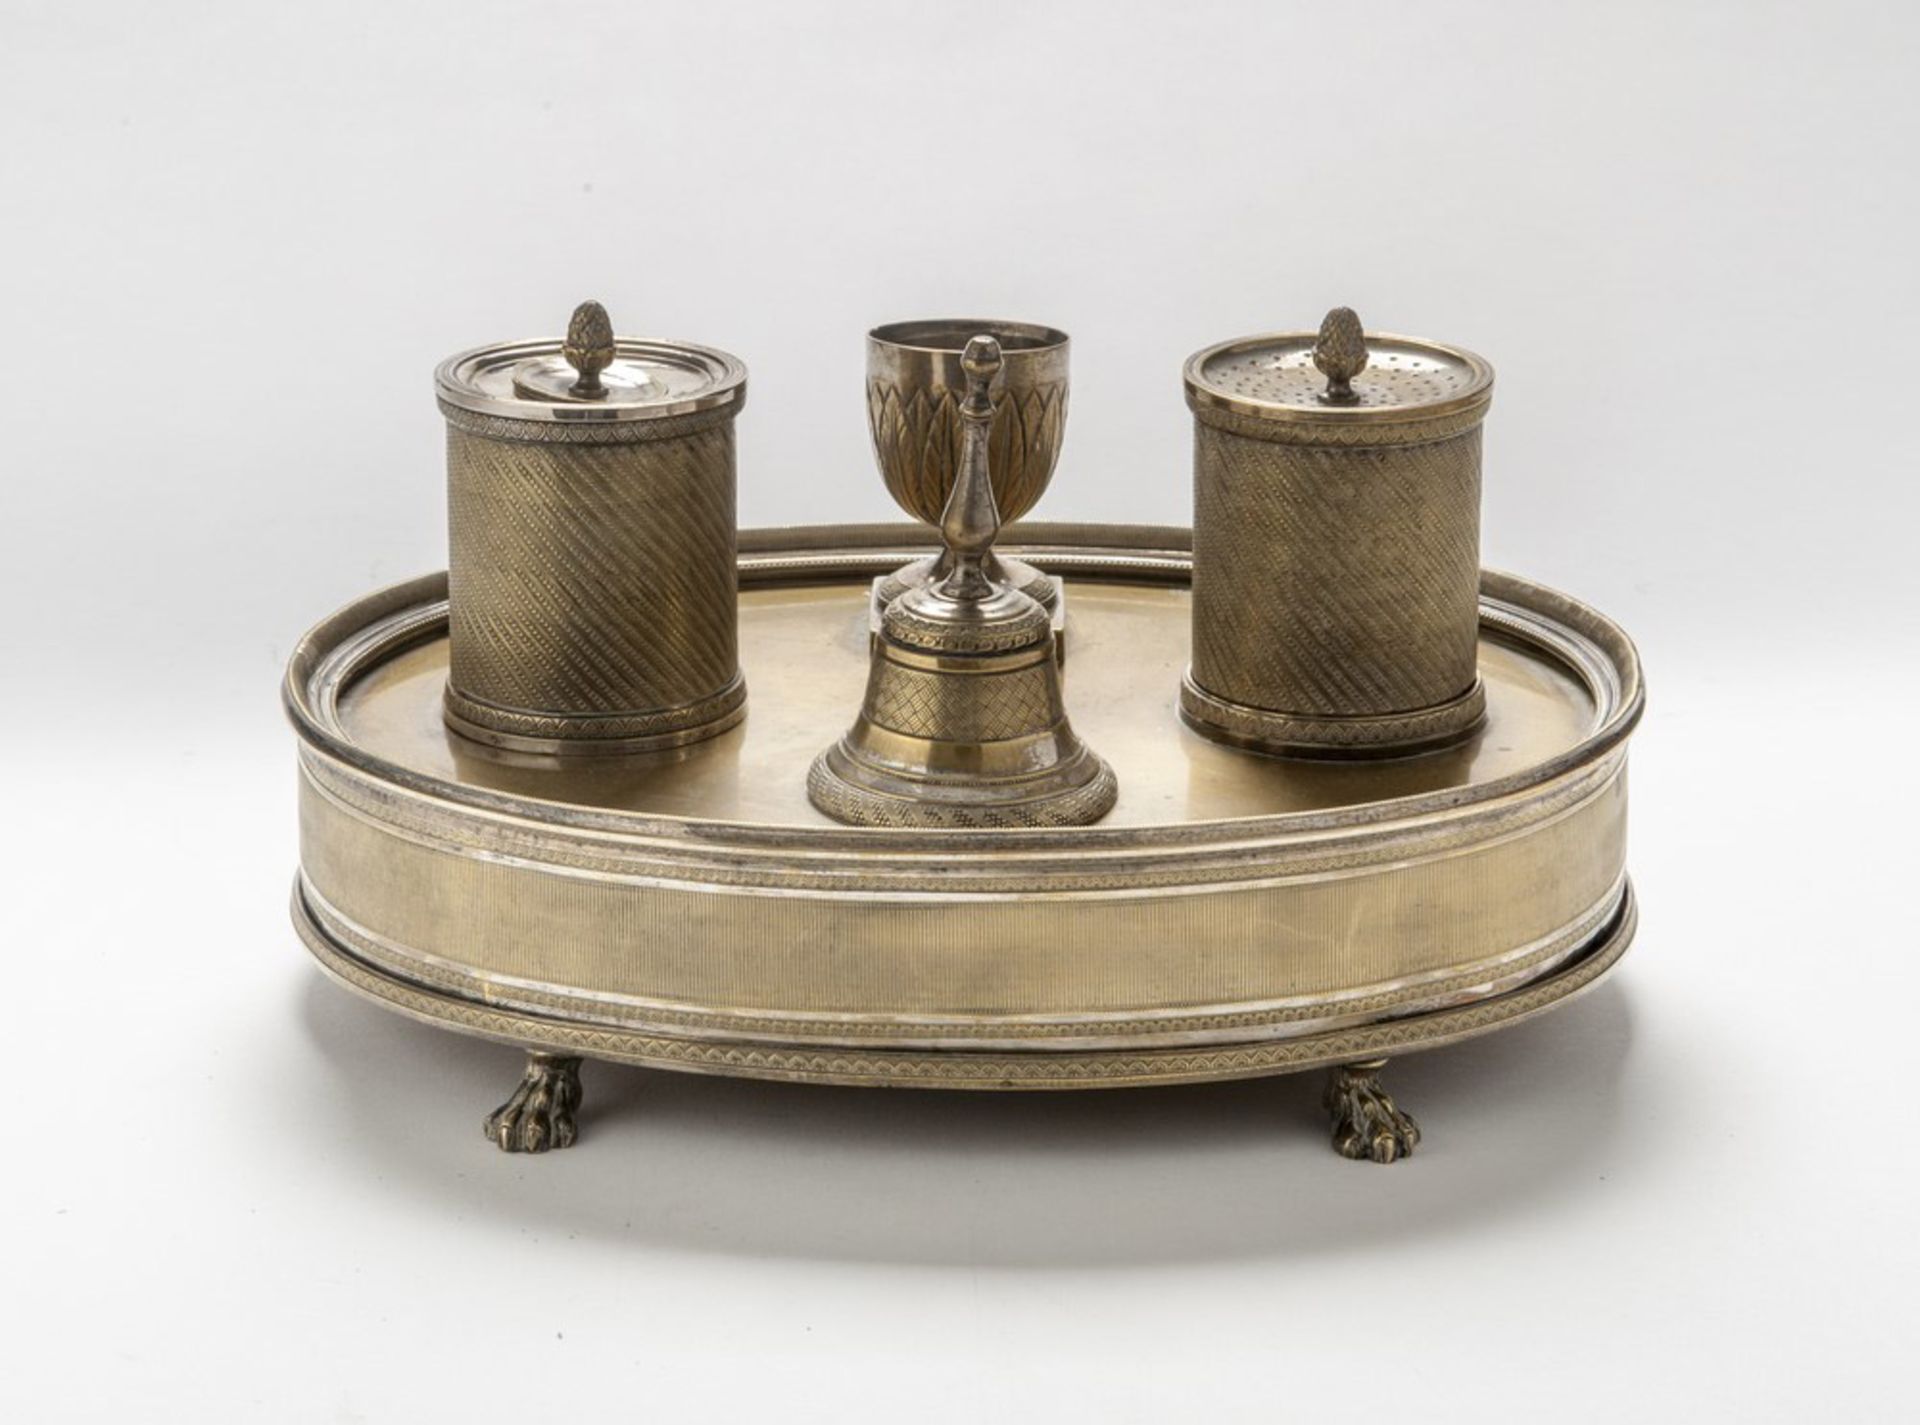 SILVER-PLATED INKWELL, 19TH CENTURY of oval shape with two cylindrical containers, small basin and